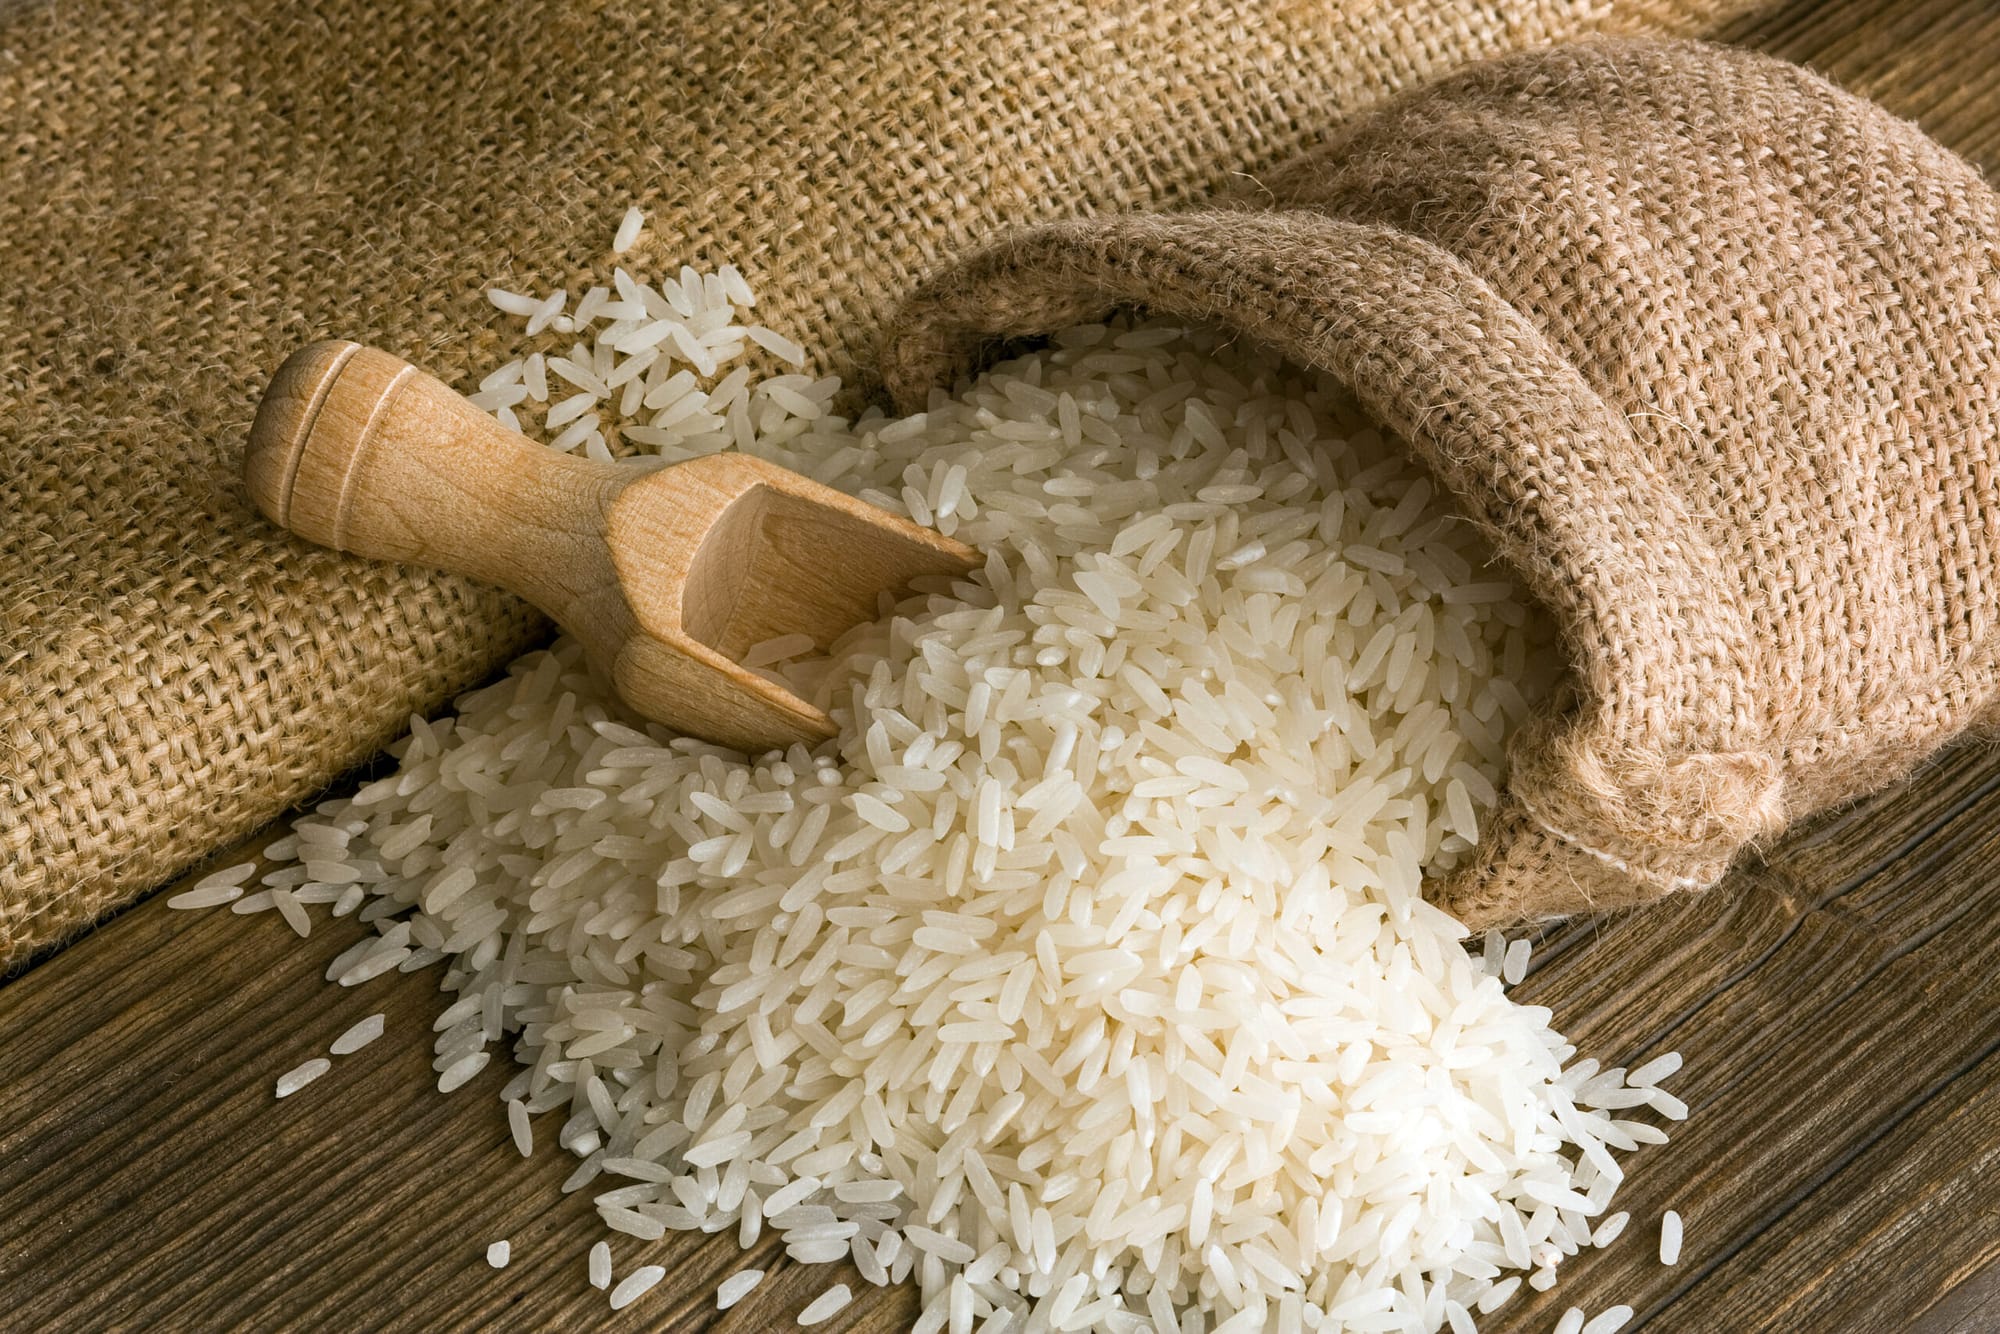 Rice is a versatile ingredient that can be used in a healthy diet.